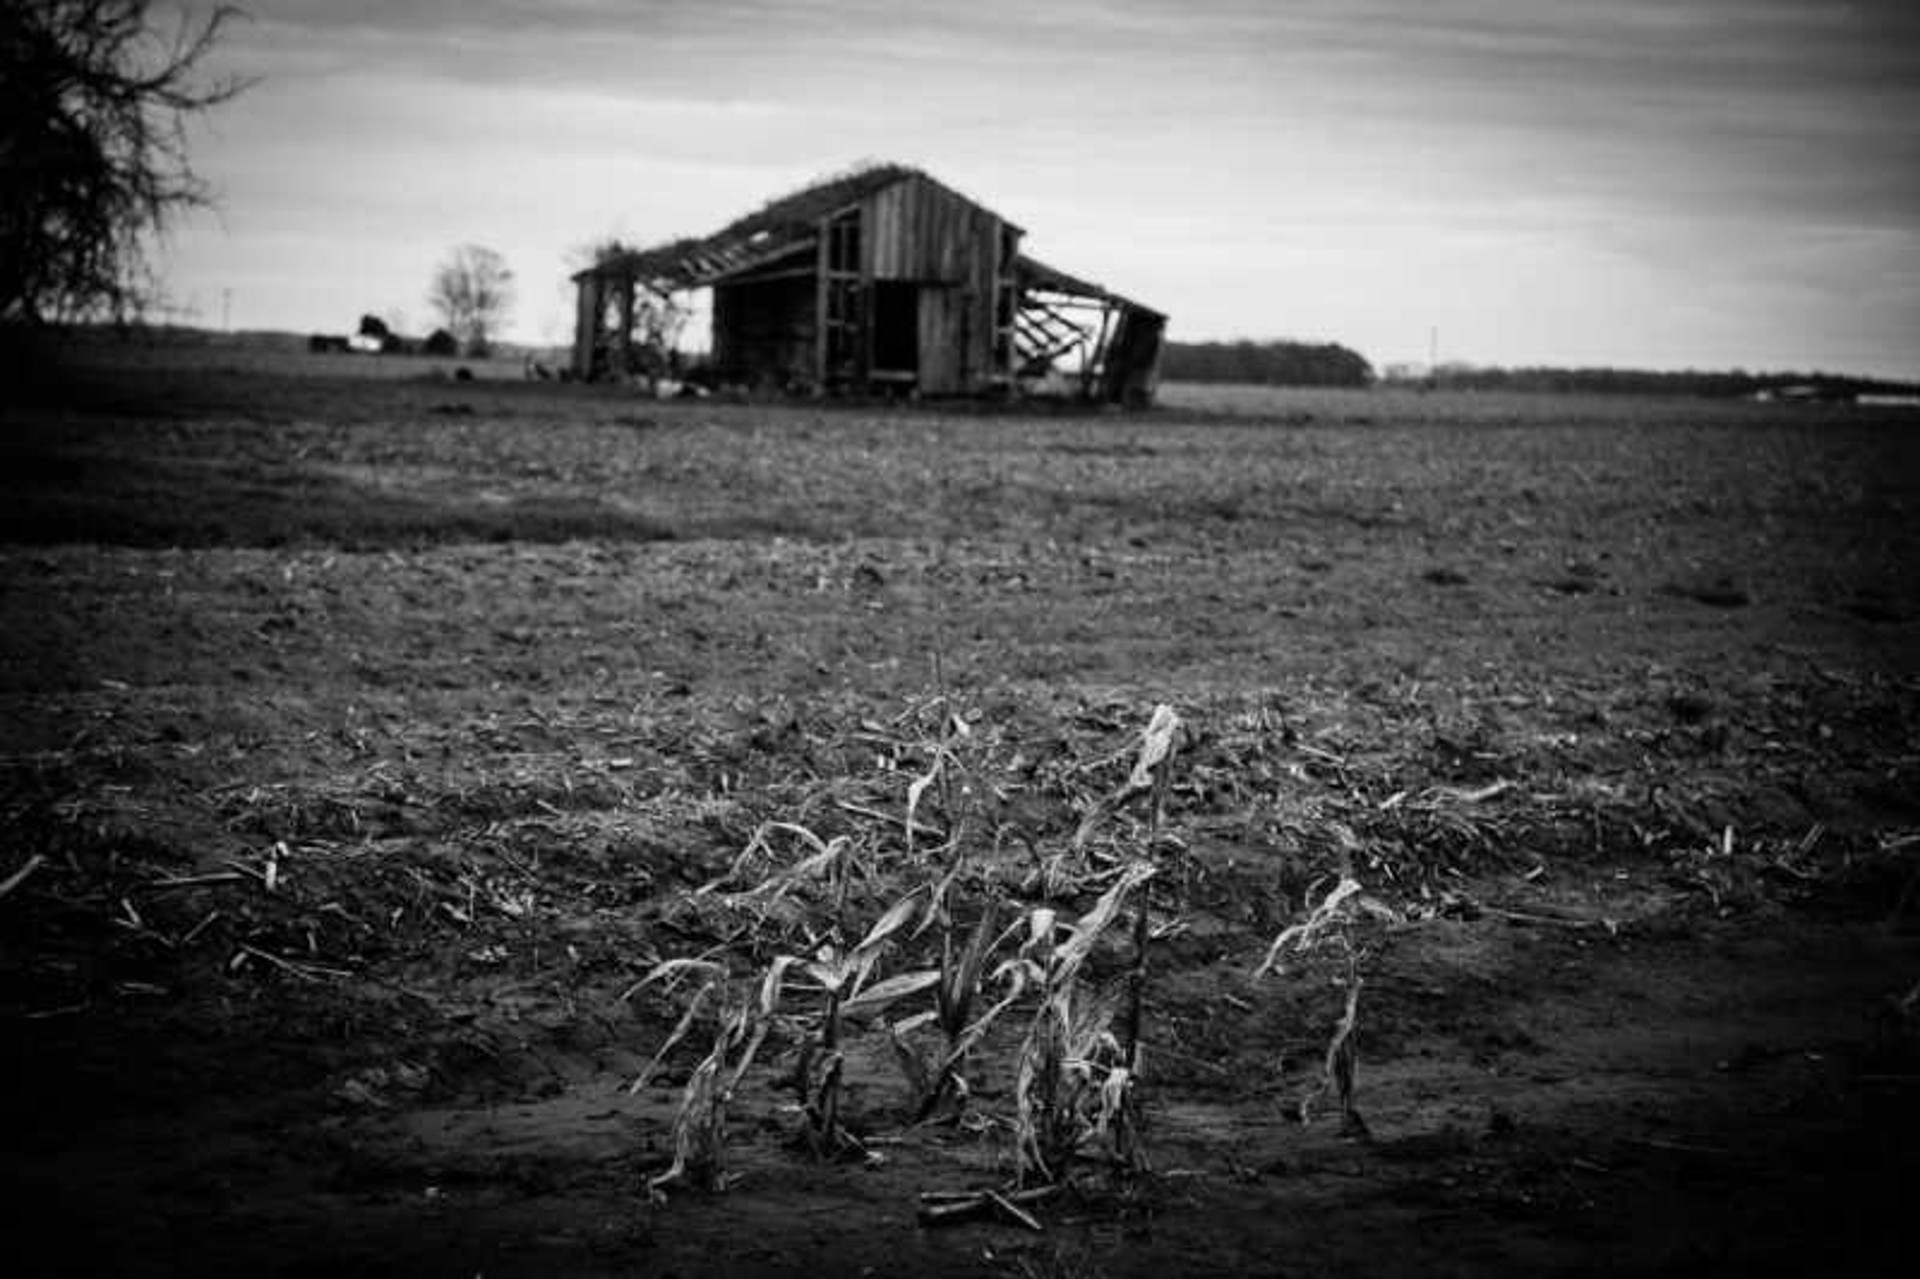 Cornfield and Barn by George Yerger